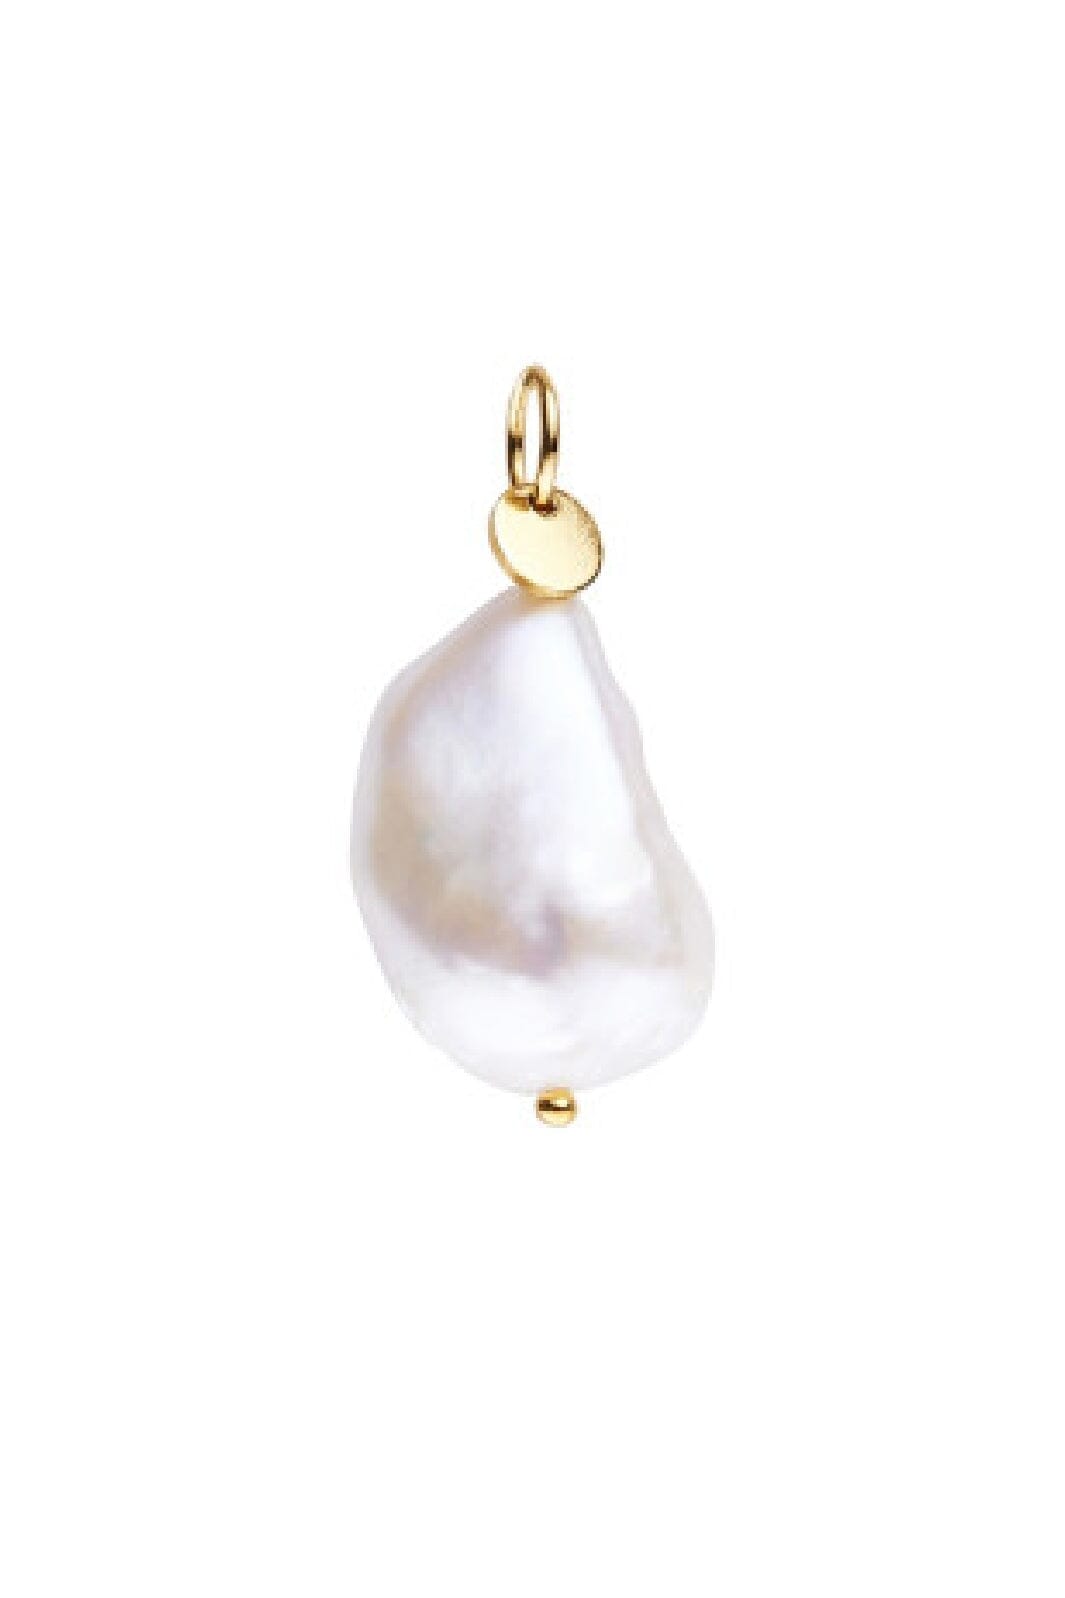 Stine A - Baroque Pearl Pendant - 5036-02-Os Vedhæng 